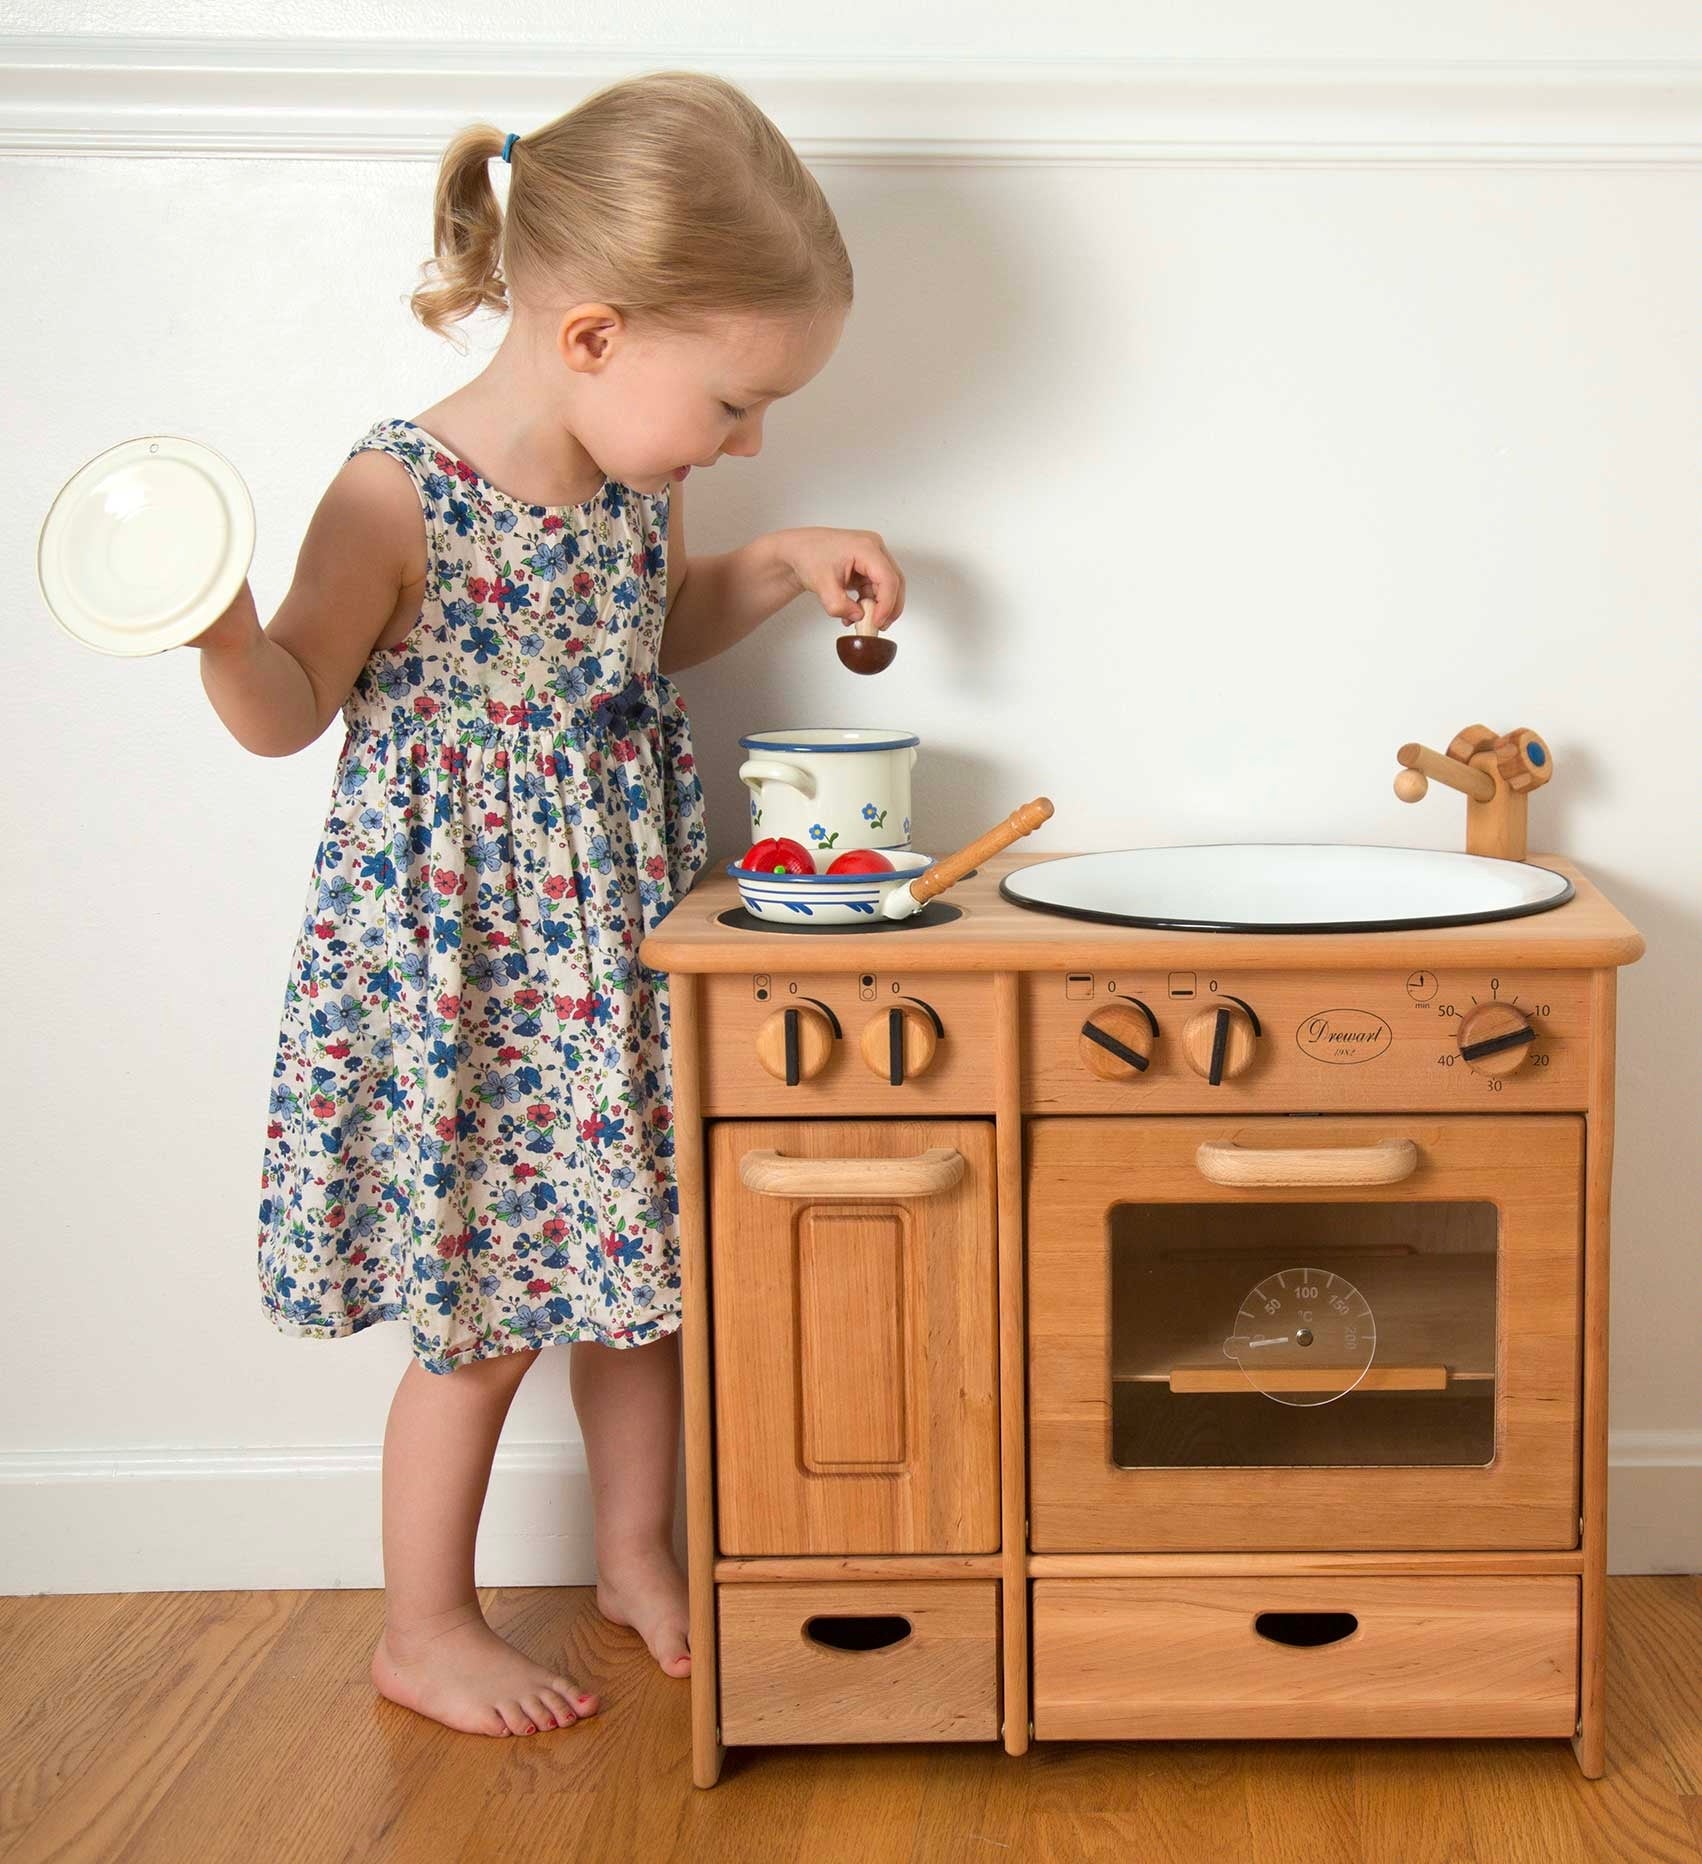 Kitchen and house play